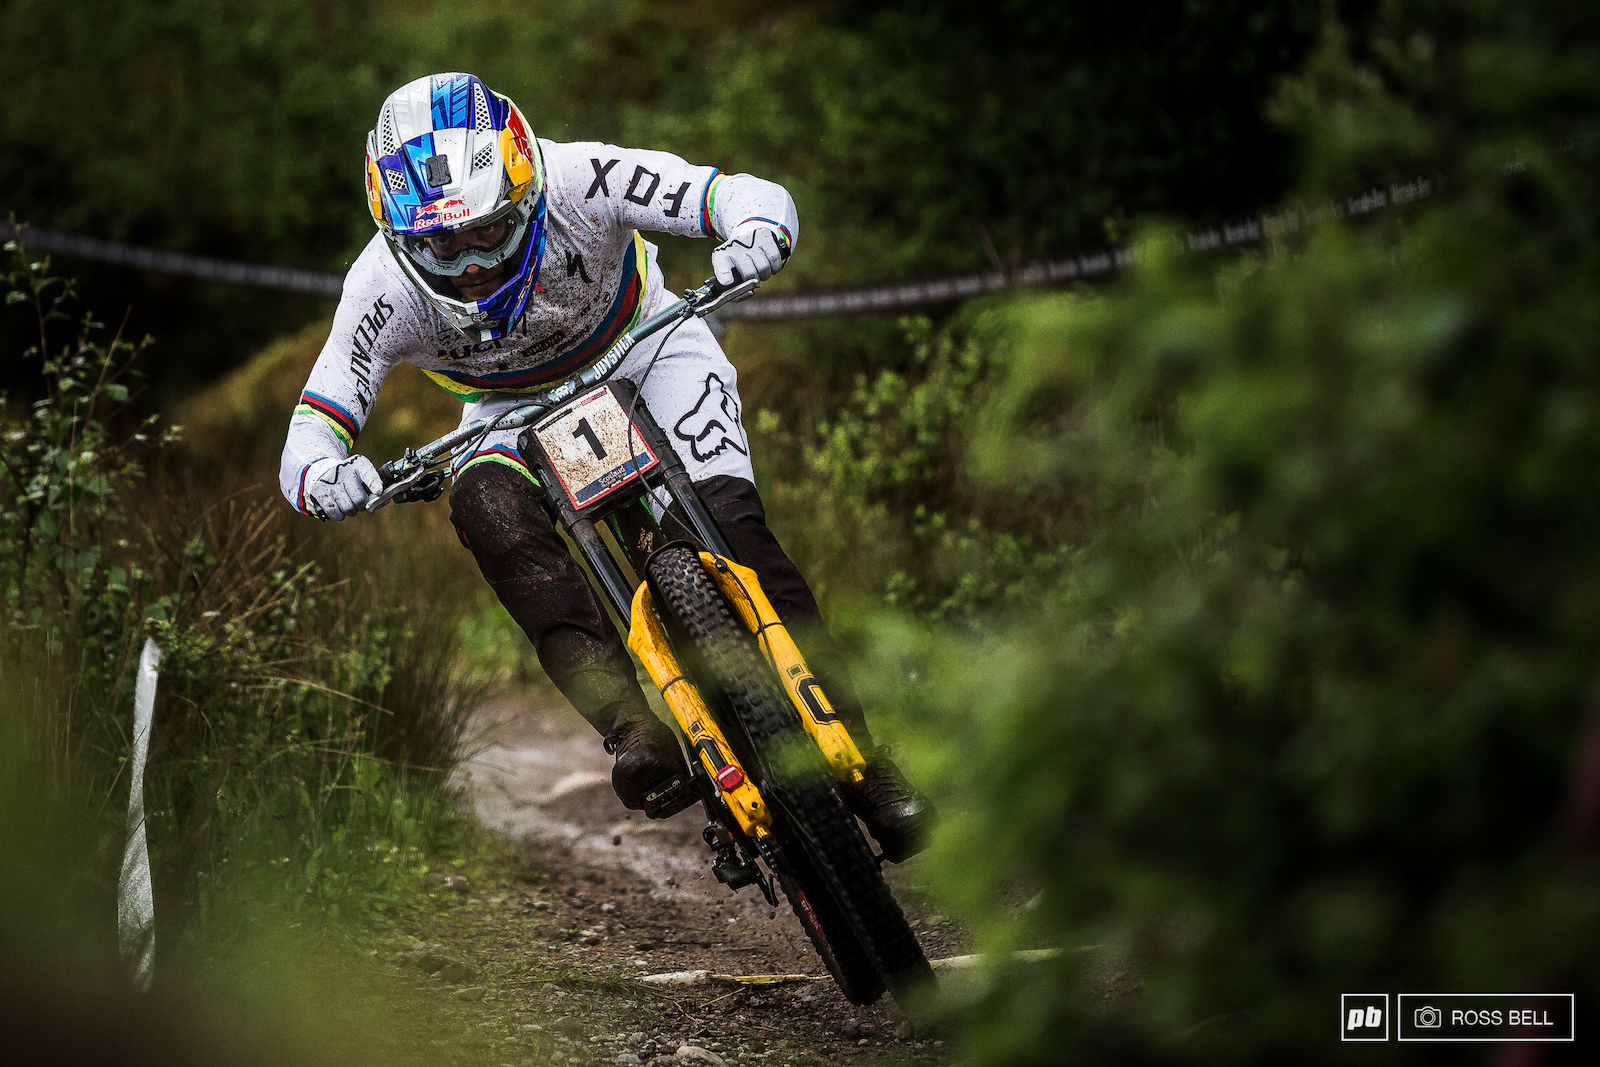 Loic Bruni pushing in his race run in Fort William in 2020 despite a big crash the previous day.